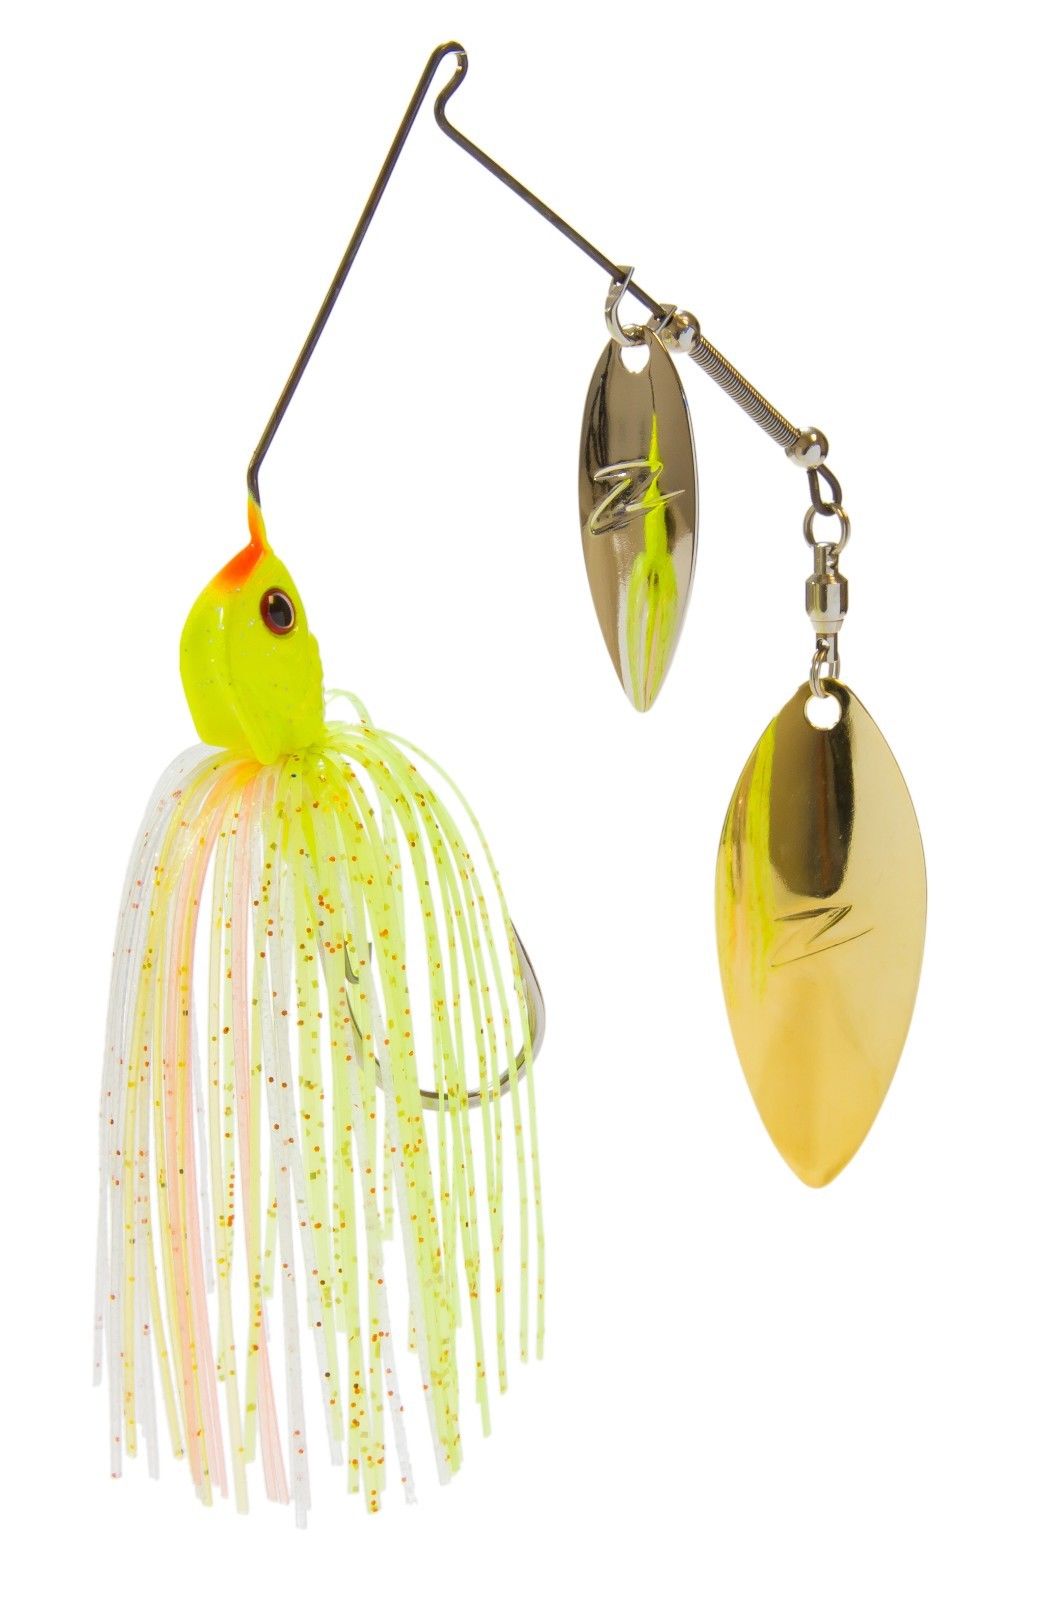 Z-Man Slingbladez Double Willow Spinnerbait - 1/2oz - Red Perch